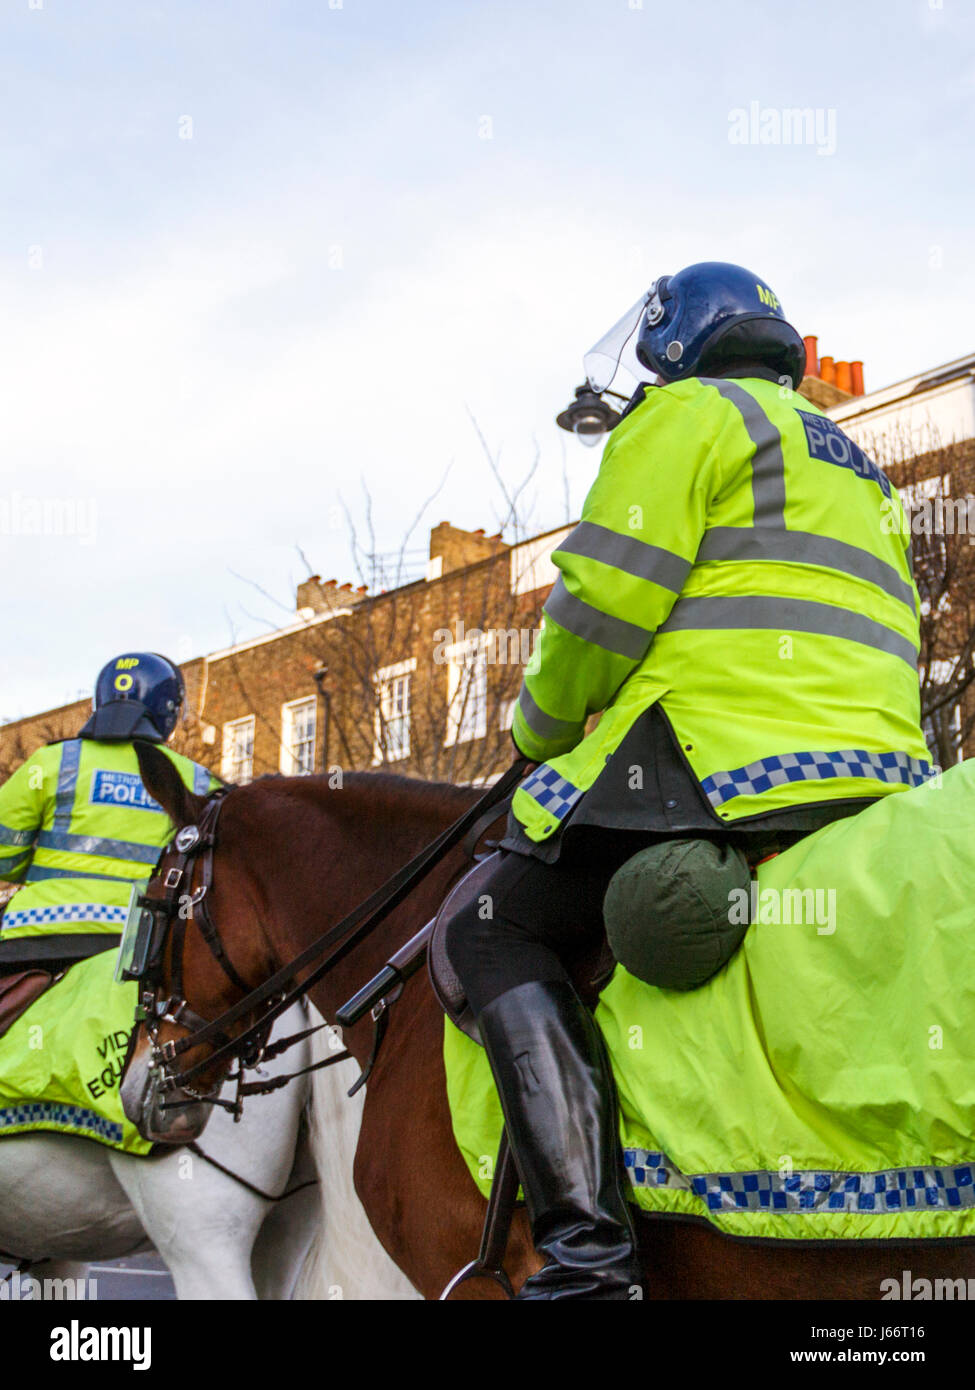 Mounted police officers in yellow high-visibility uniform on match day, Islington, London, UK Stock Photo